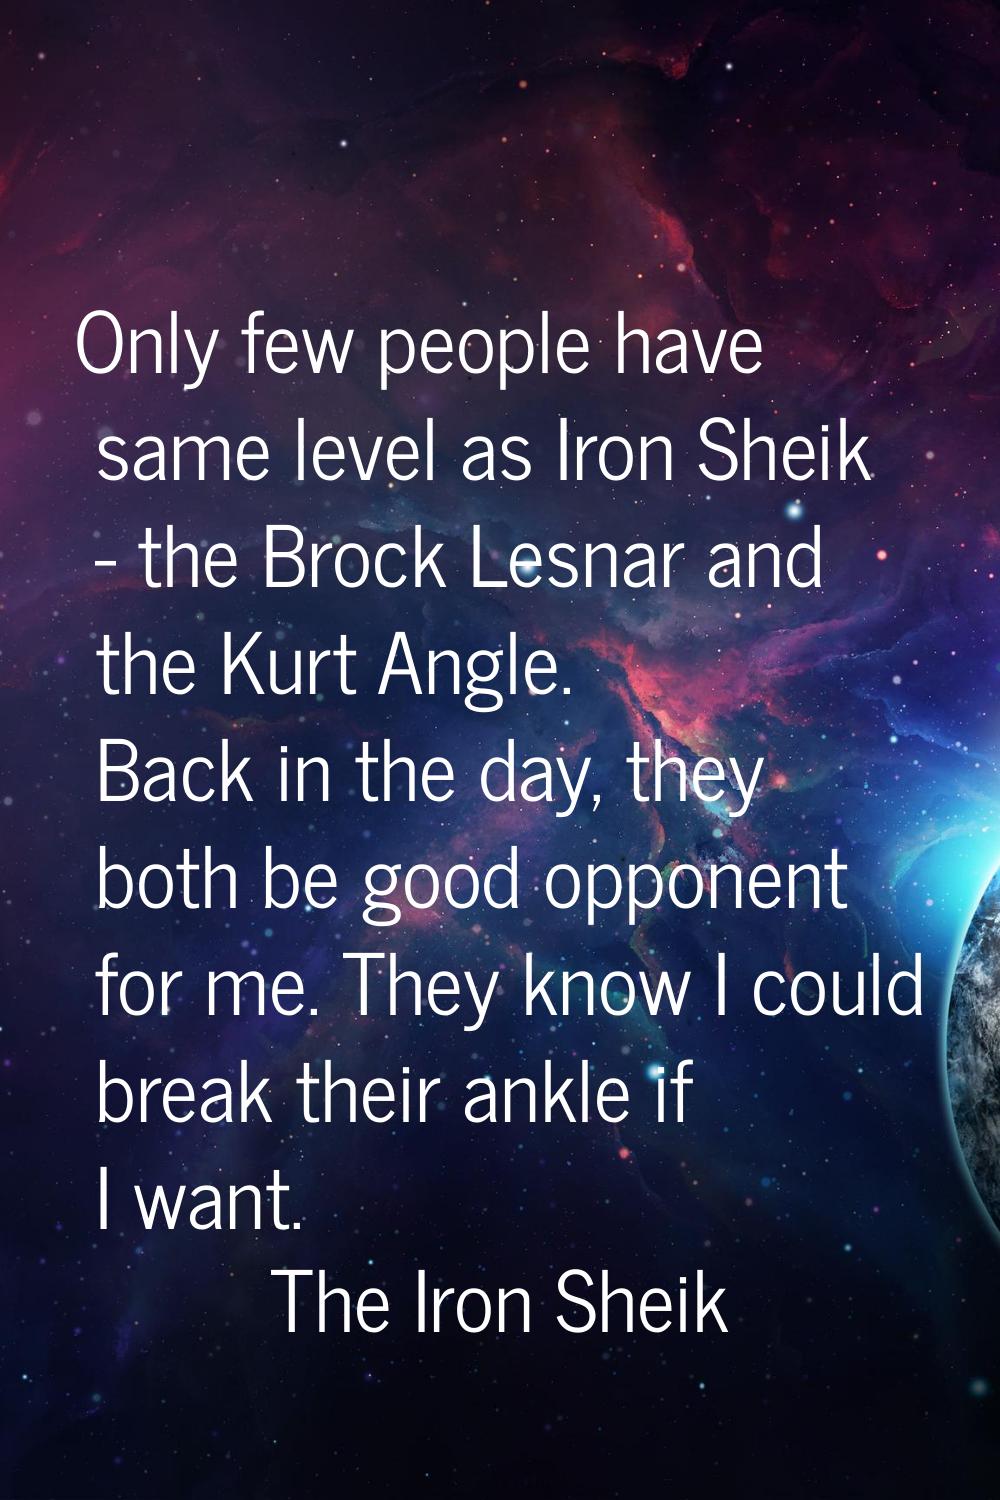 Only few people have same level as Iron Sheik - the Brock Lesnar and the Kurt Angle. Back in the da